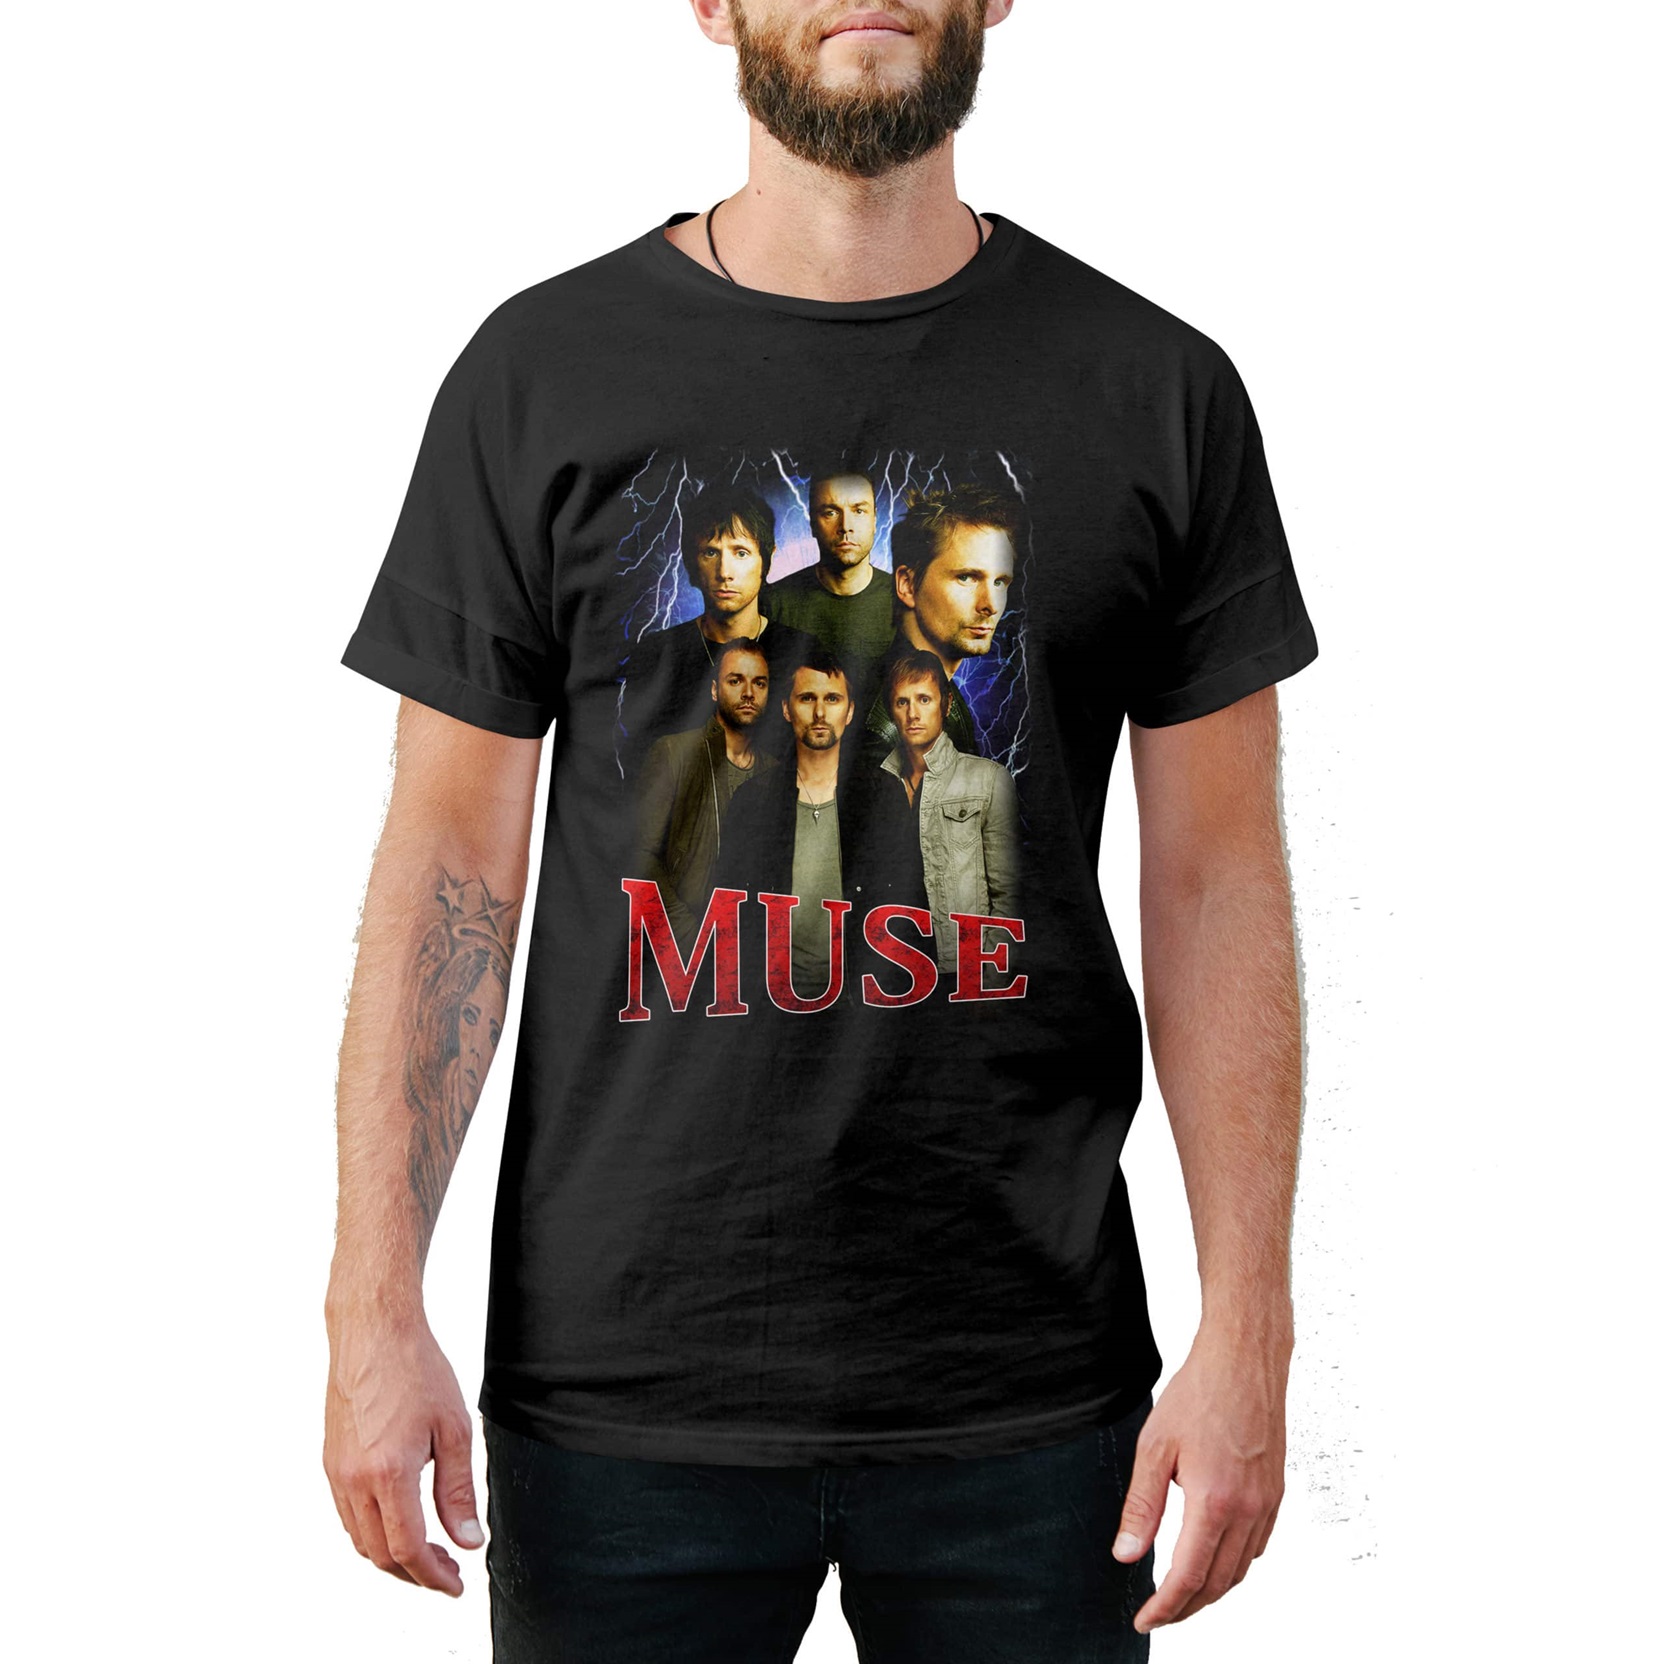 Find Your Muse: Explore the Official Shop for Music Goodies